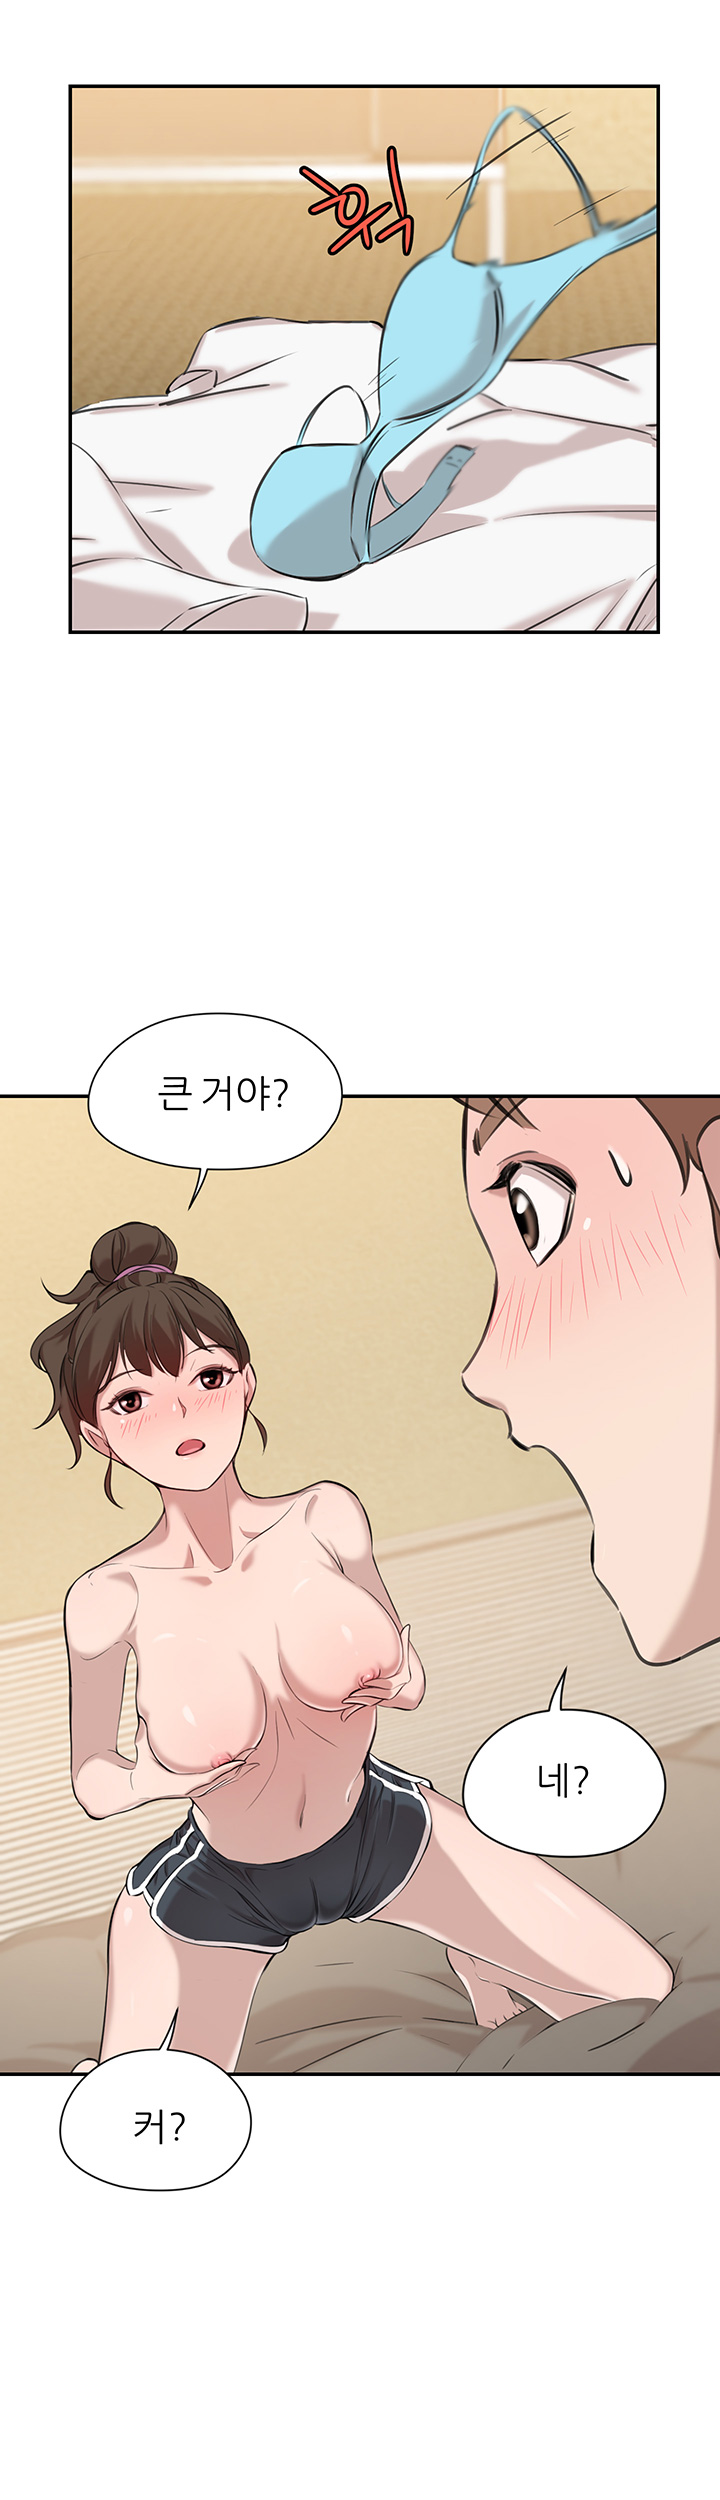 Puberty Raw - Chapter 3 Page 48